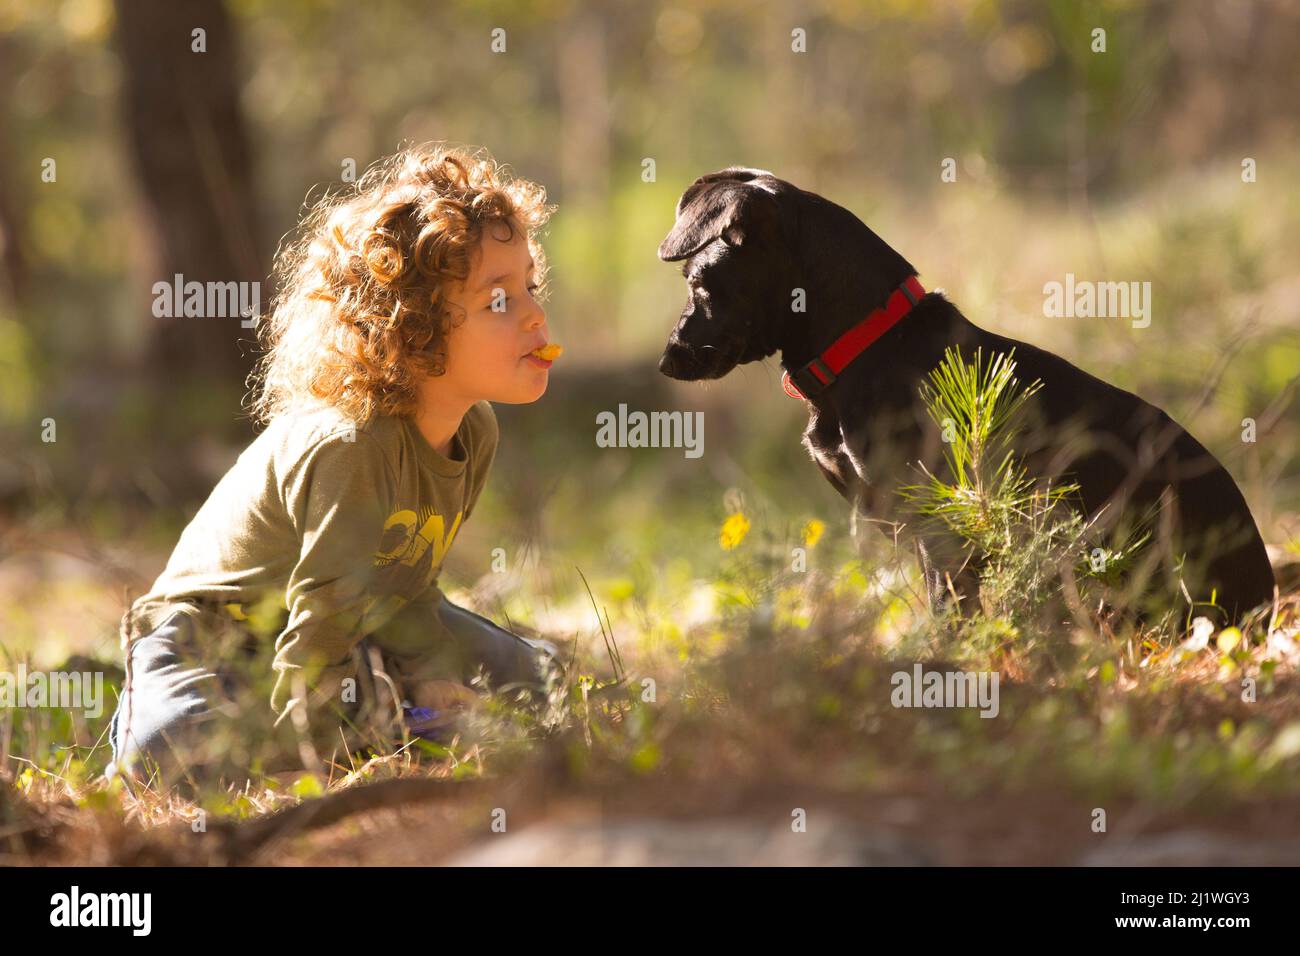 Young child interacts with her dog outdoors in a spring bloom field Stock Photo